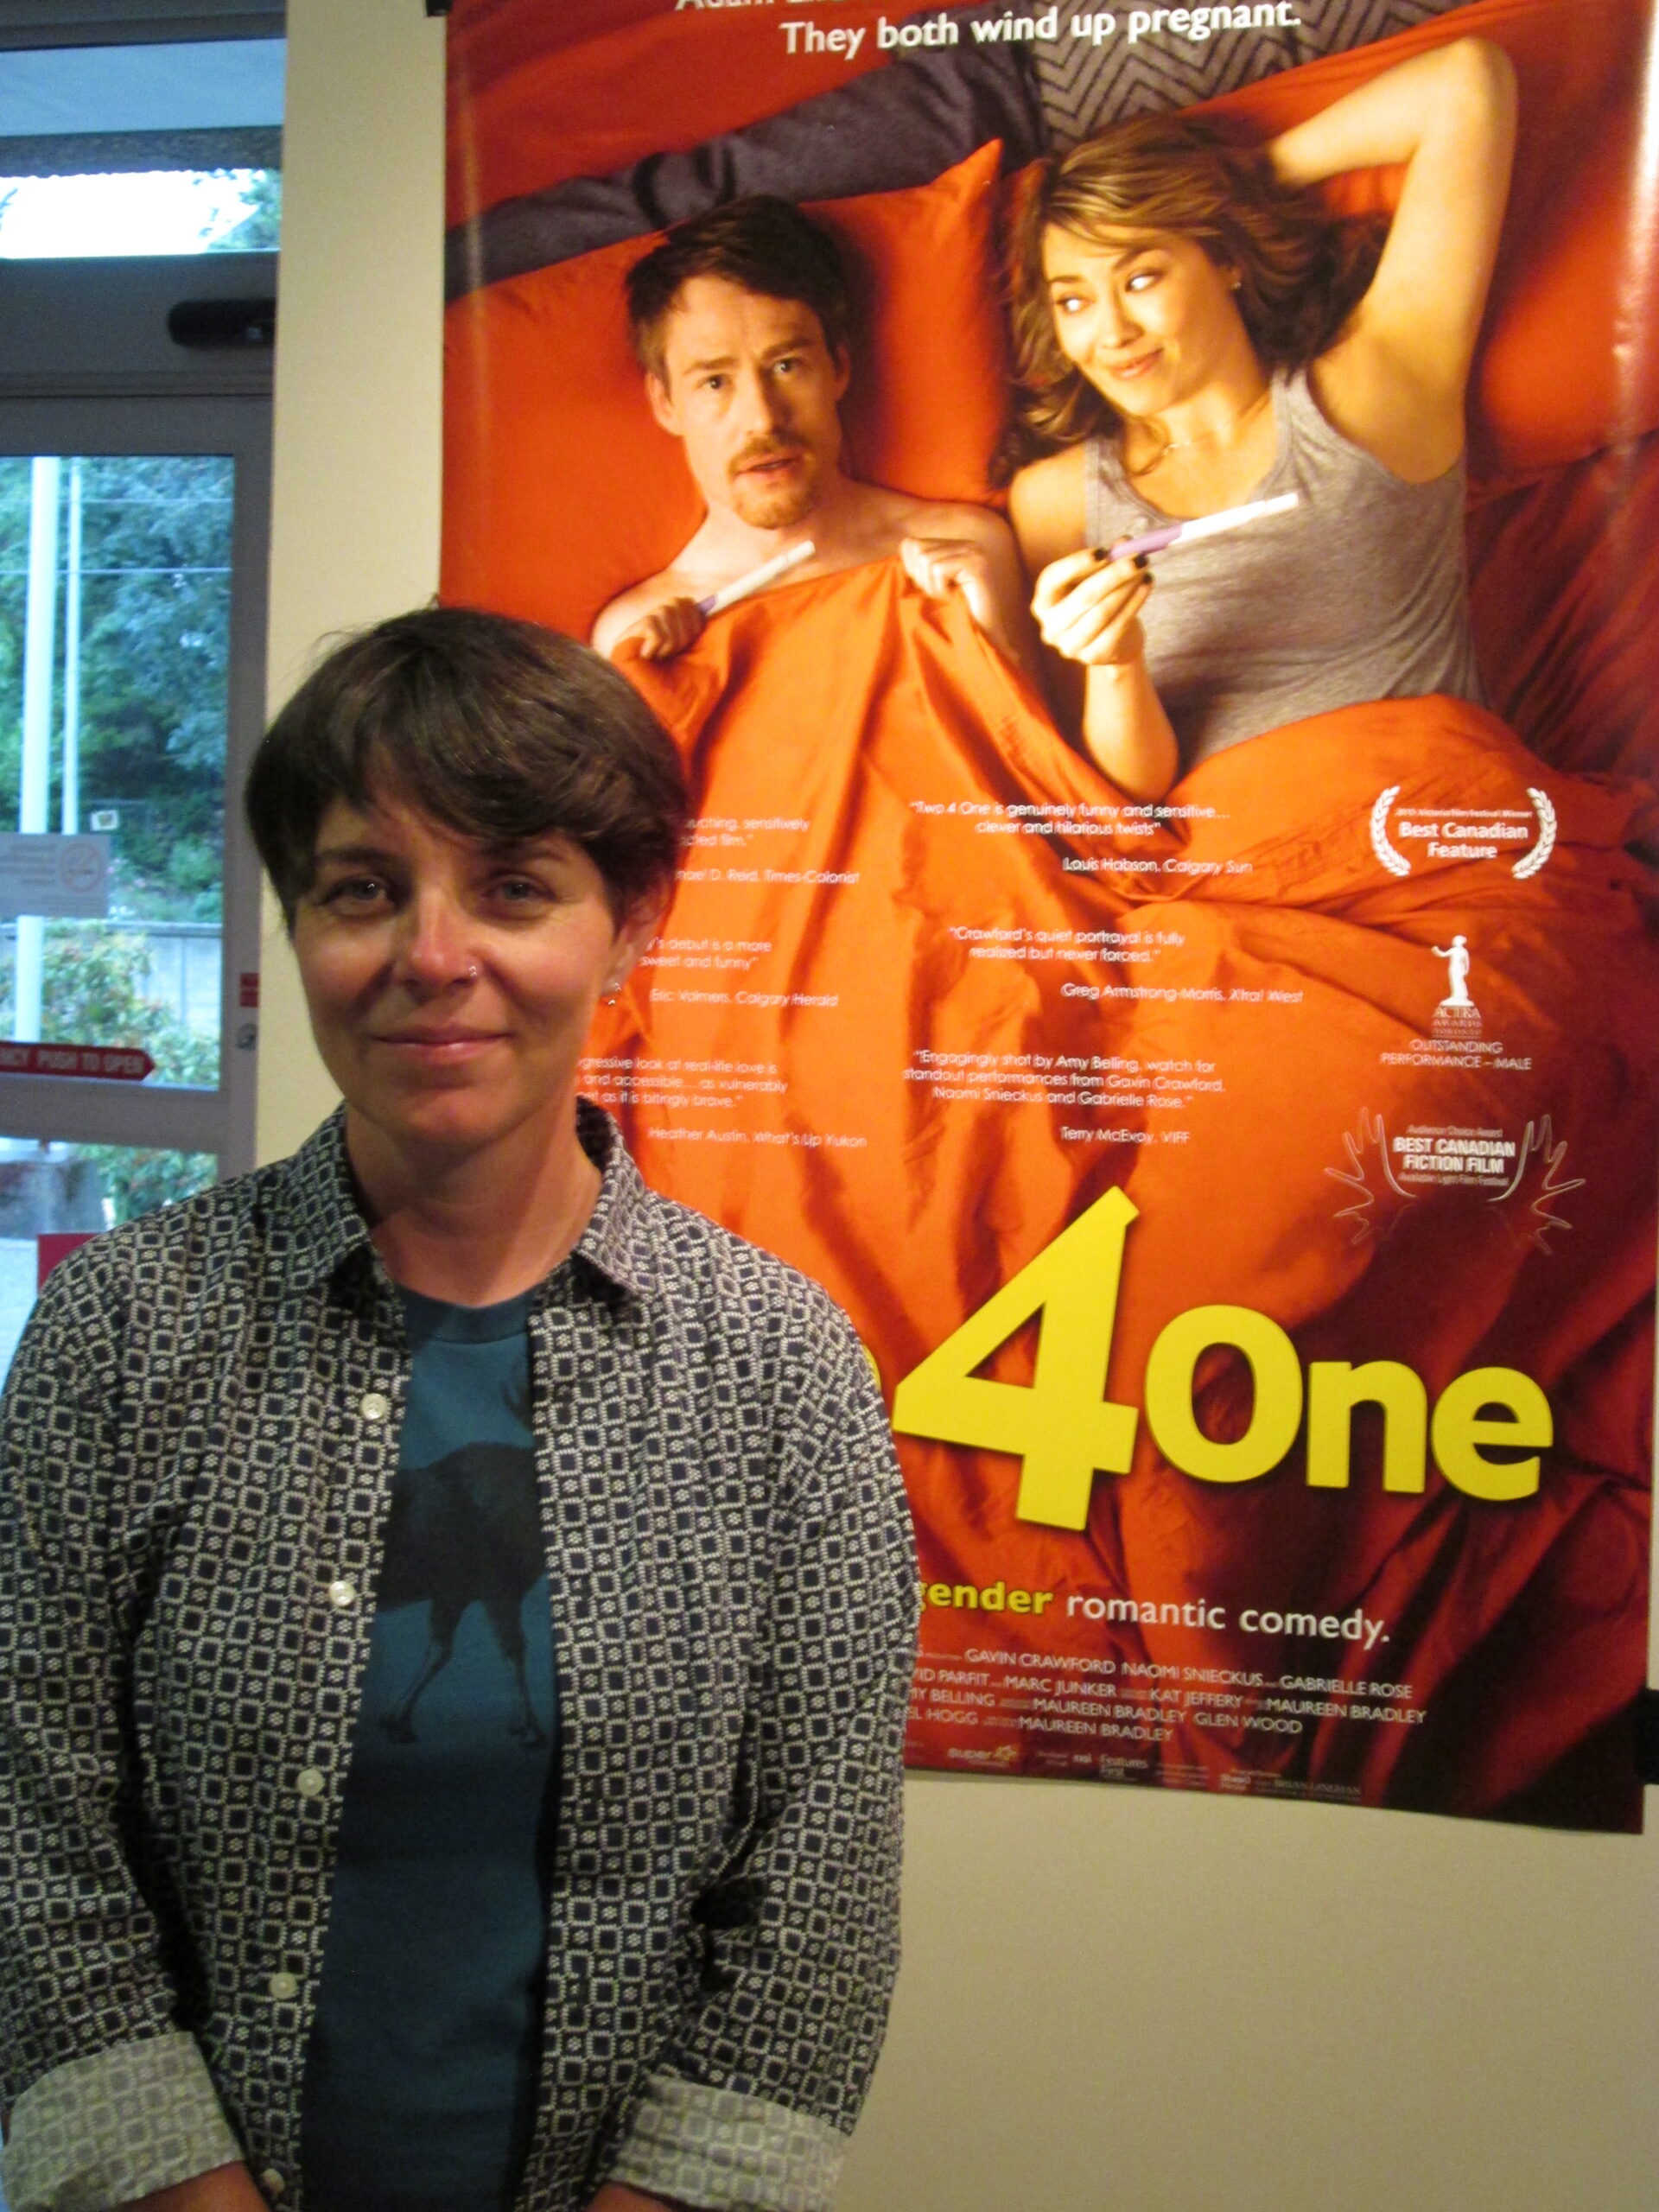 July 2015 Victoria’s Maureen Bradley with her feature “Two4One”.